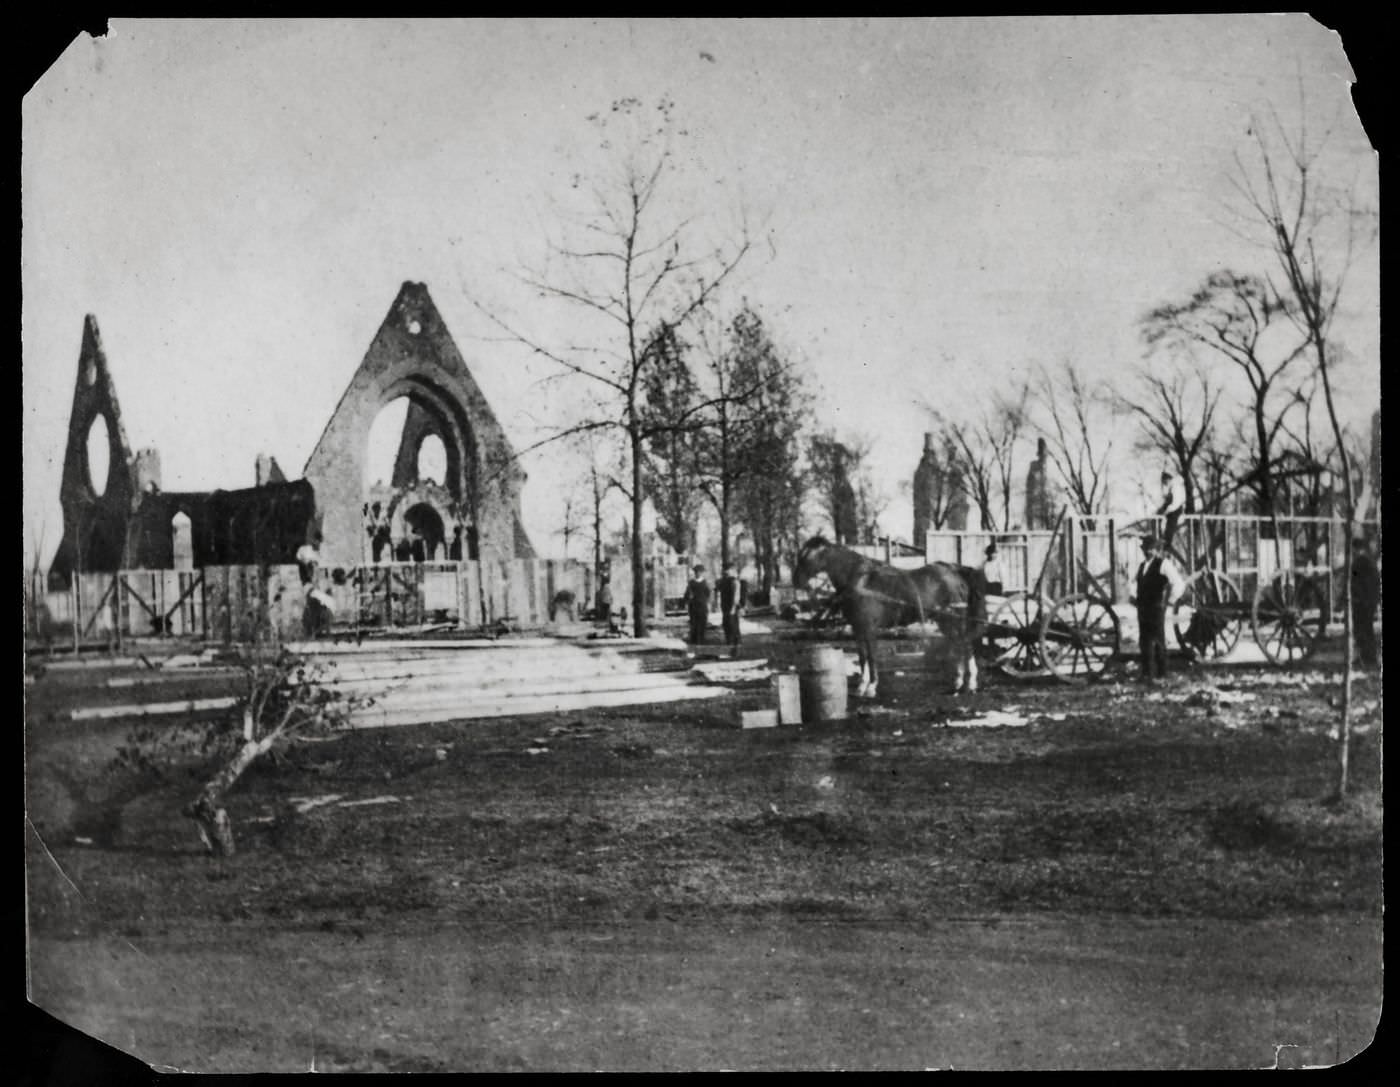 An unidentified location in Chicago in the aftermath of the Great Chicago Fire of 1871.